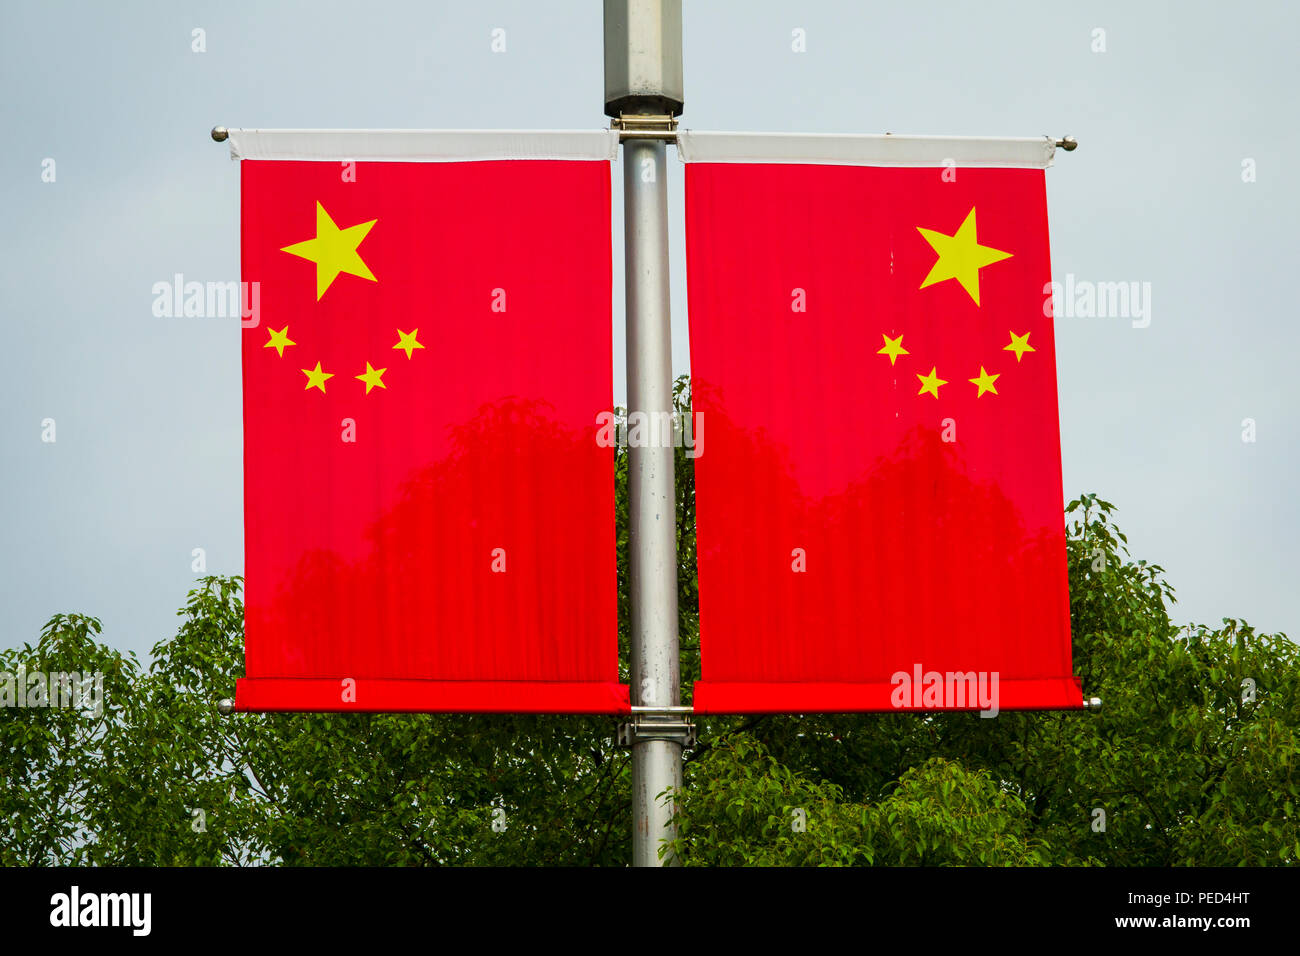 Flag of People's Republic of China in Shanghai Communist Party Stock Photo